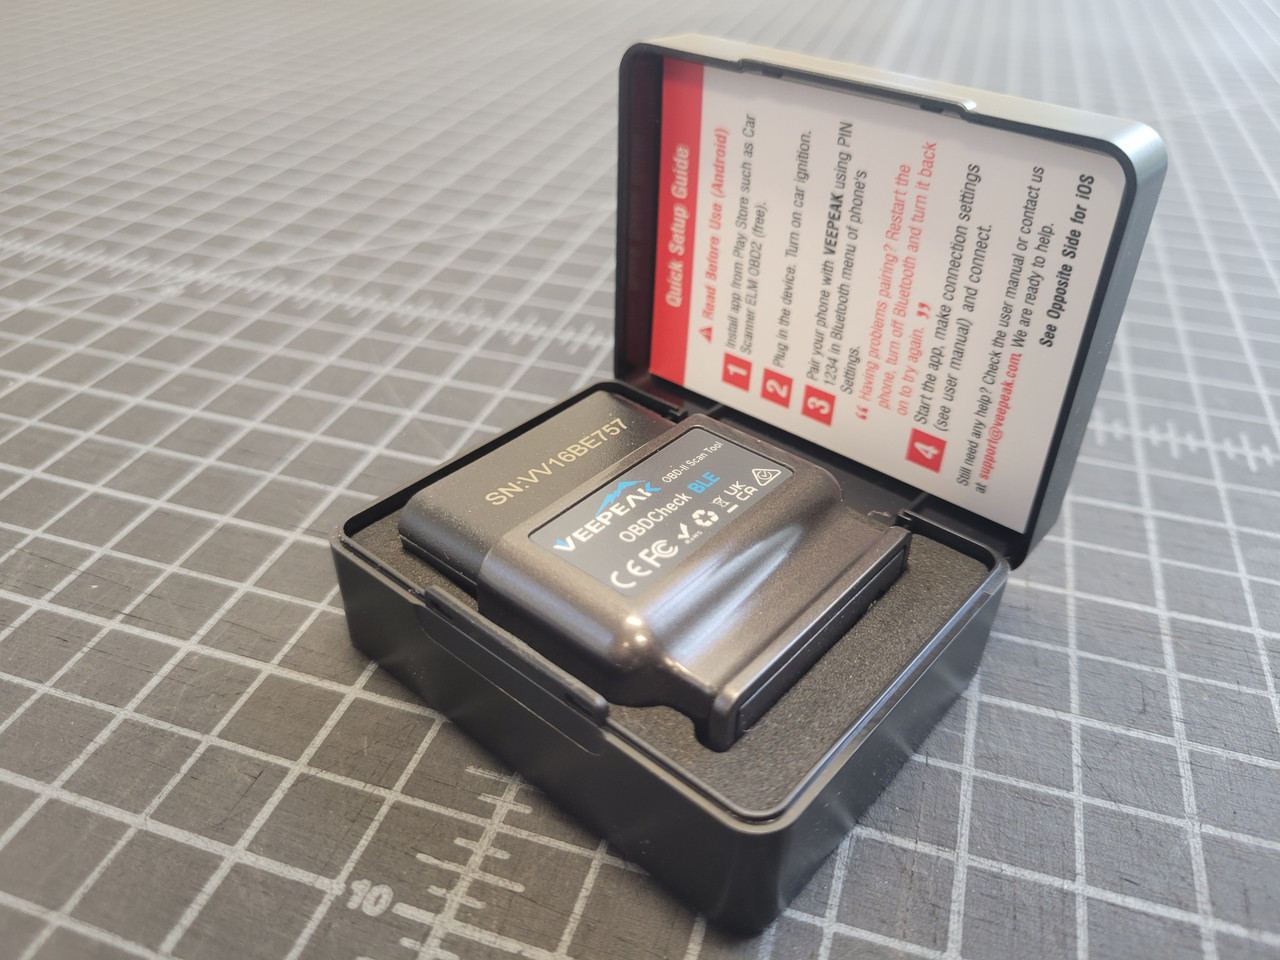 VeePeak Bluetooth OBDII Diagnostic Tool with the included case, top open and instructions visible